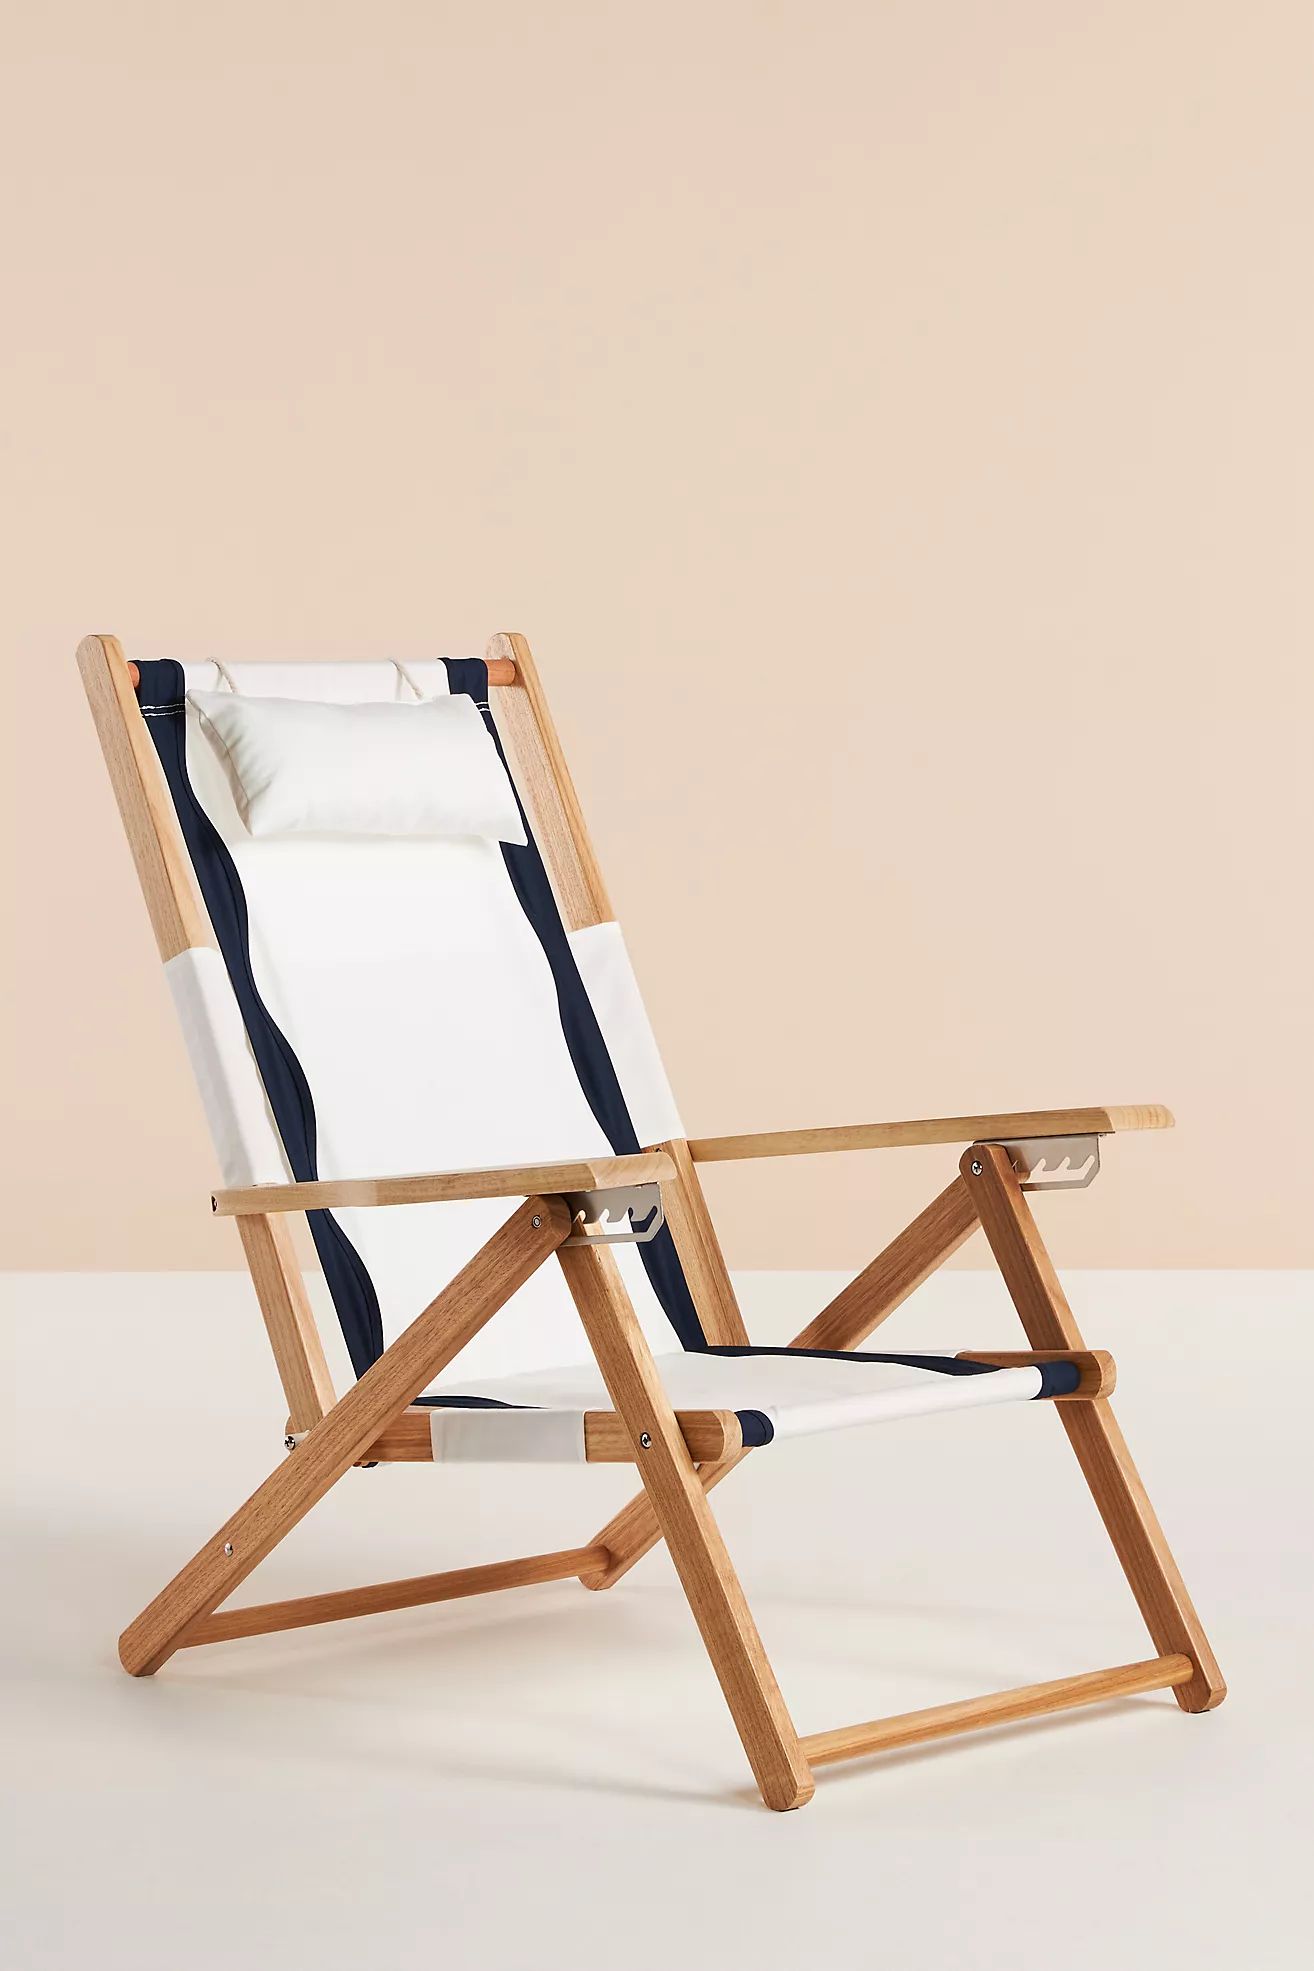 Business & Pleasure Co. Tommy Riviera Beach Chair | Anthropologie (US)